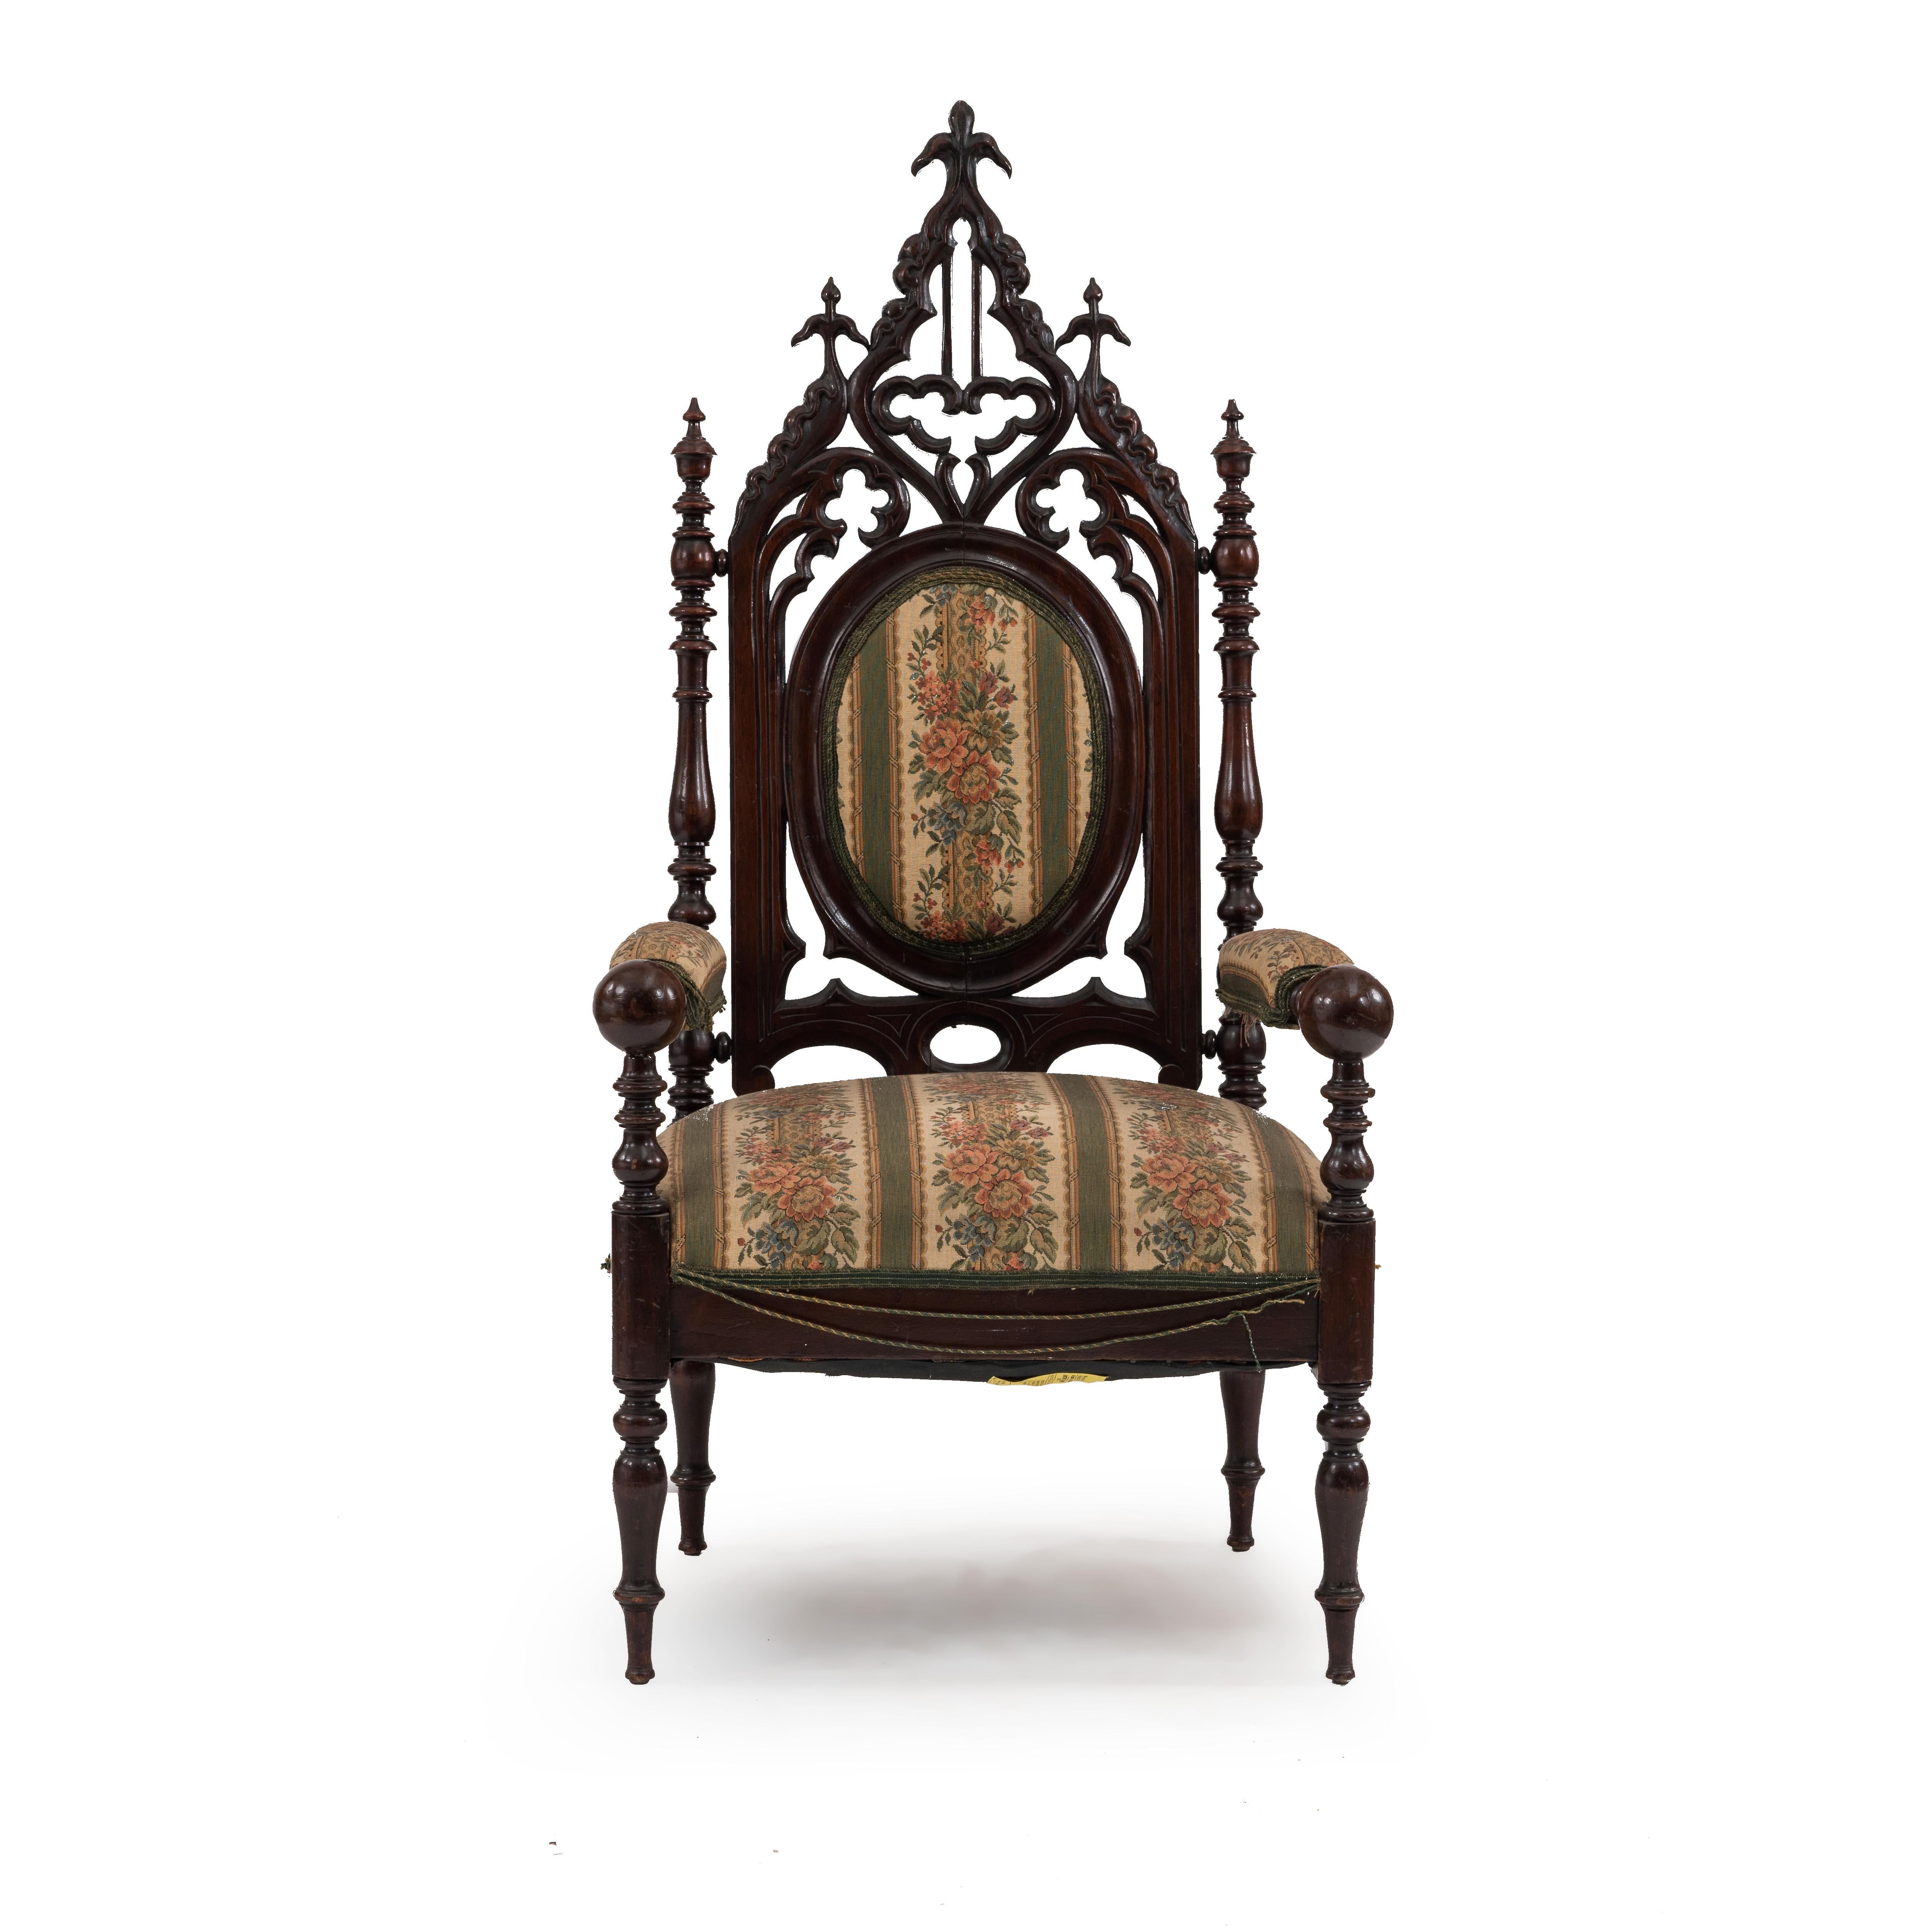 American Victorian Gothic Revival mahogany arm chair with ogee arched back & green striped seat. (late 19th Cent)
